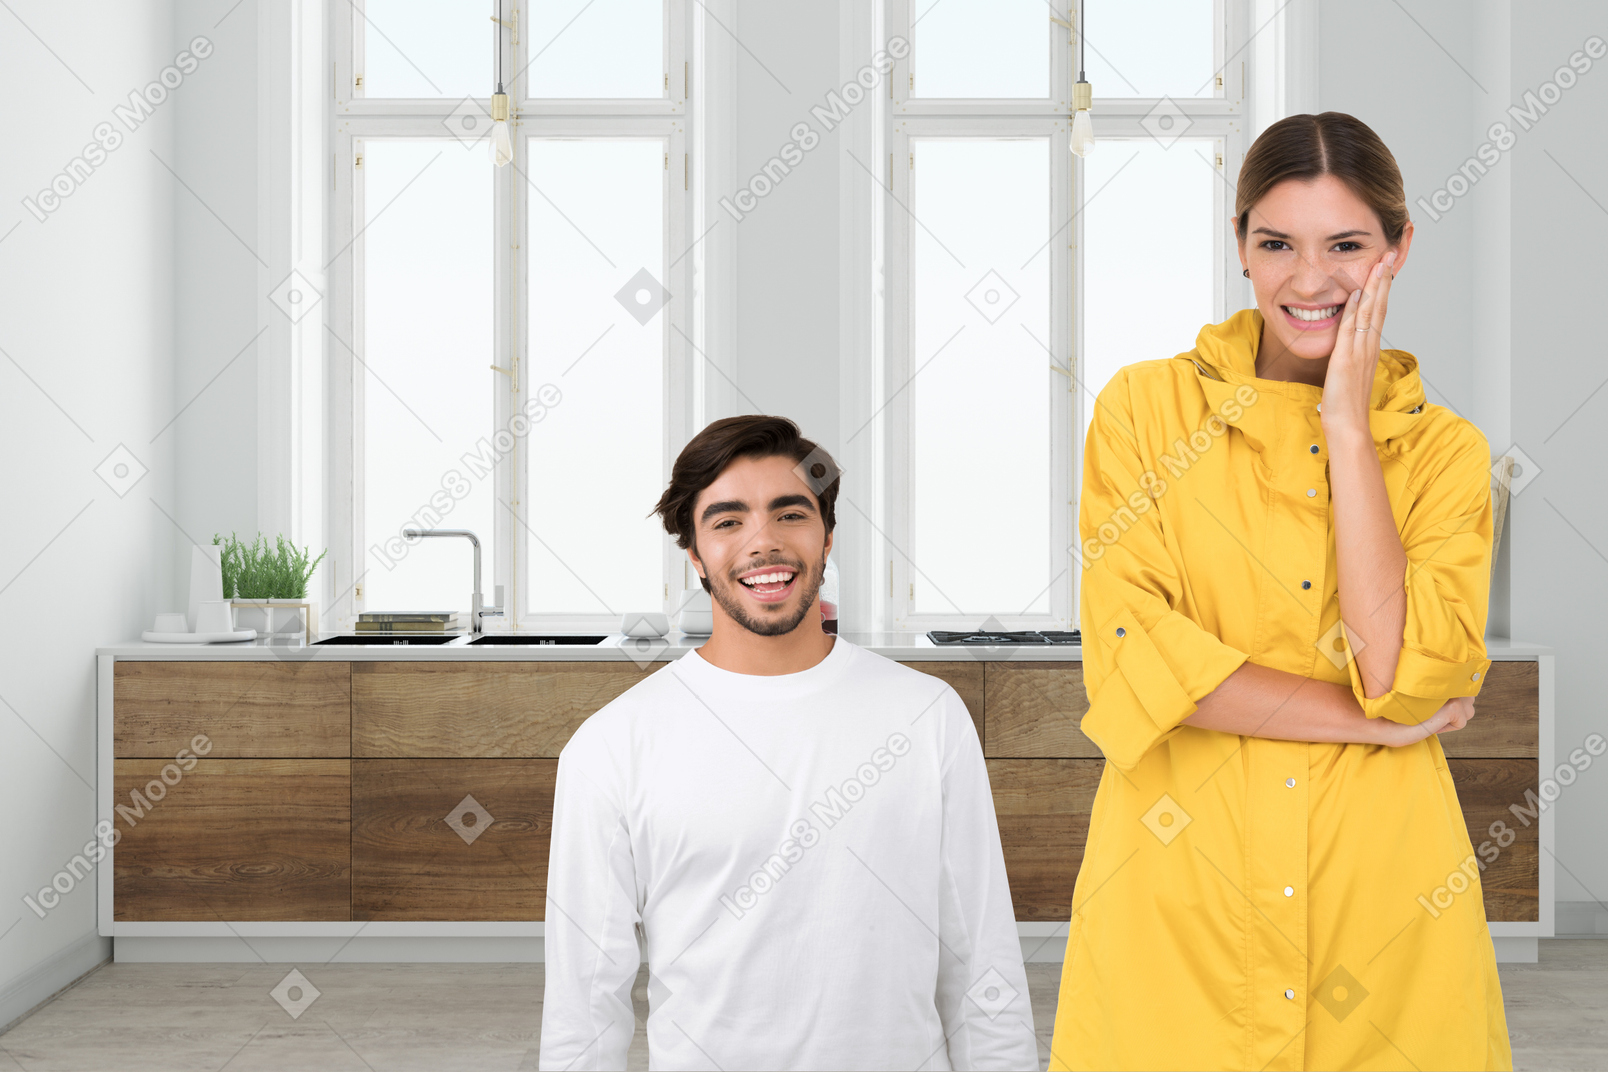 A short man standing next to a woman in a kitchen